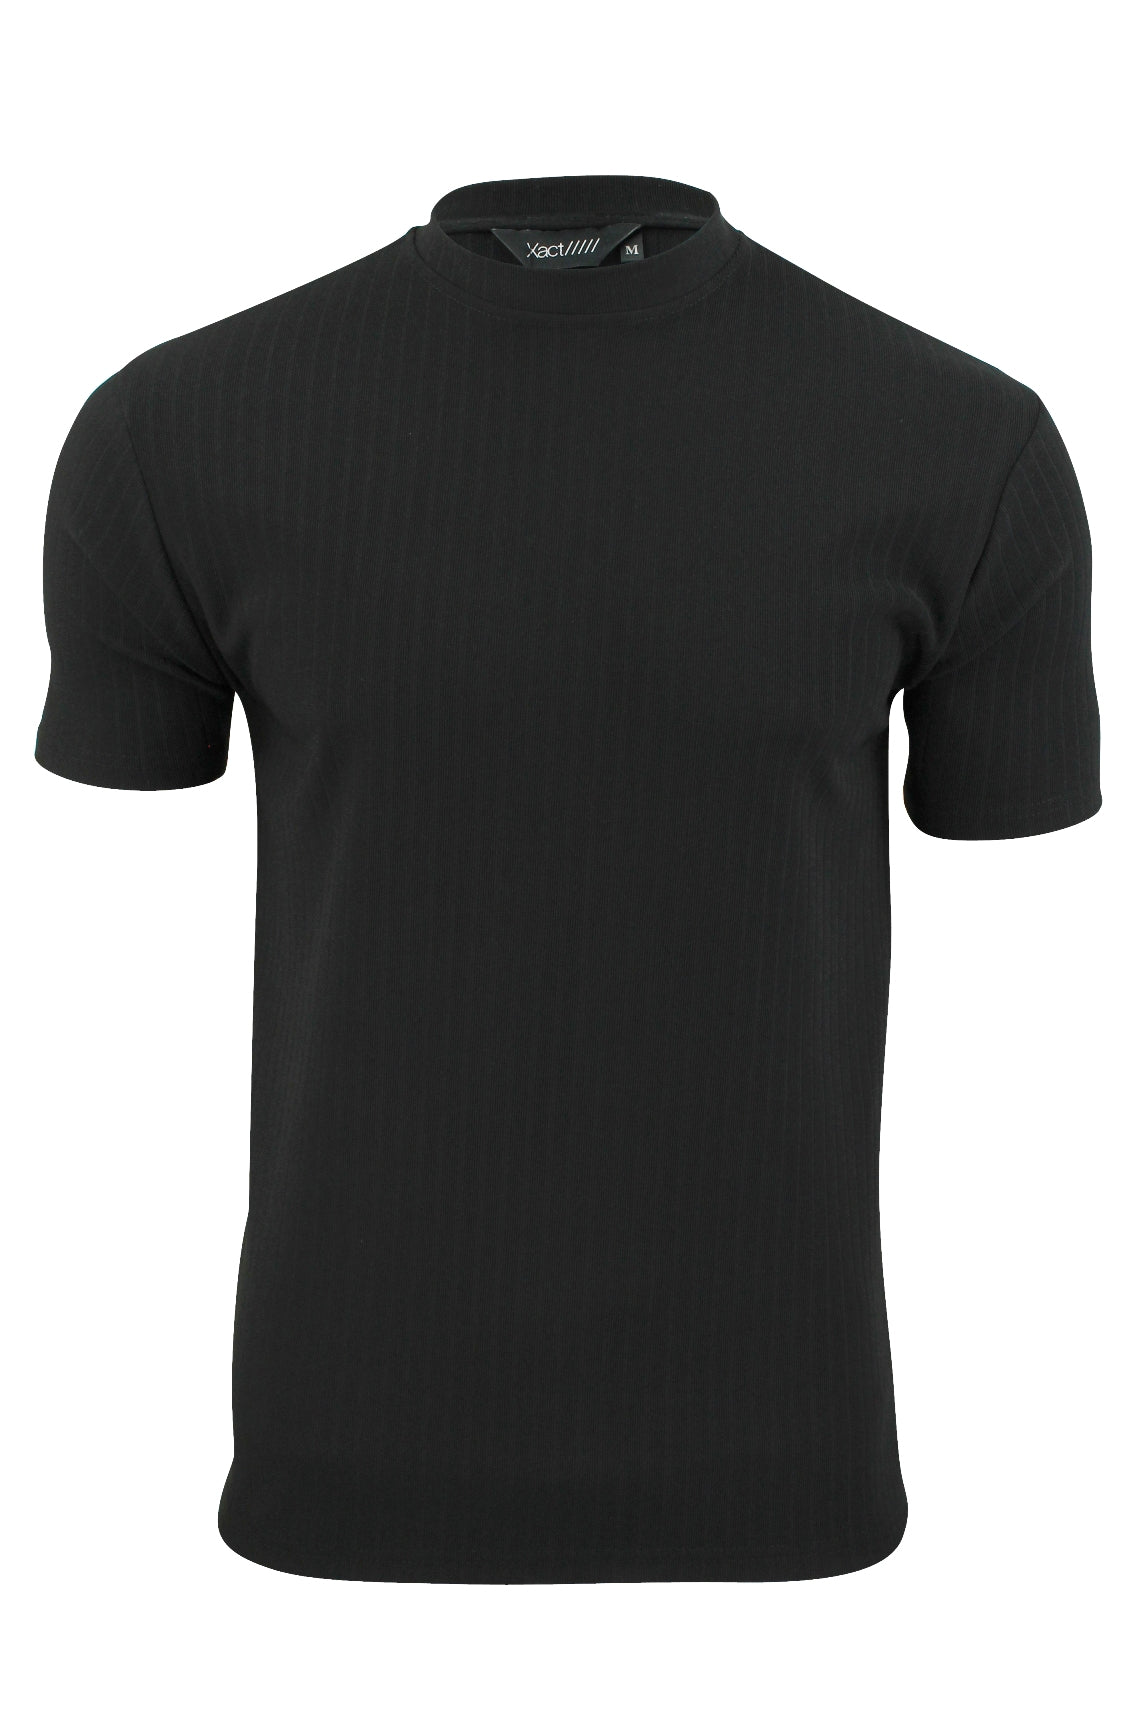 Mens Rib T - Shirt by Xact Clothing Crew Neck Slim Gym Muscle Fit-Main Image